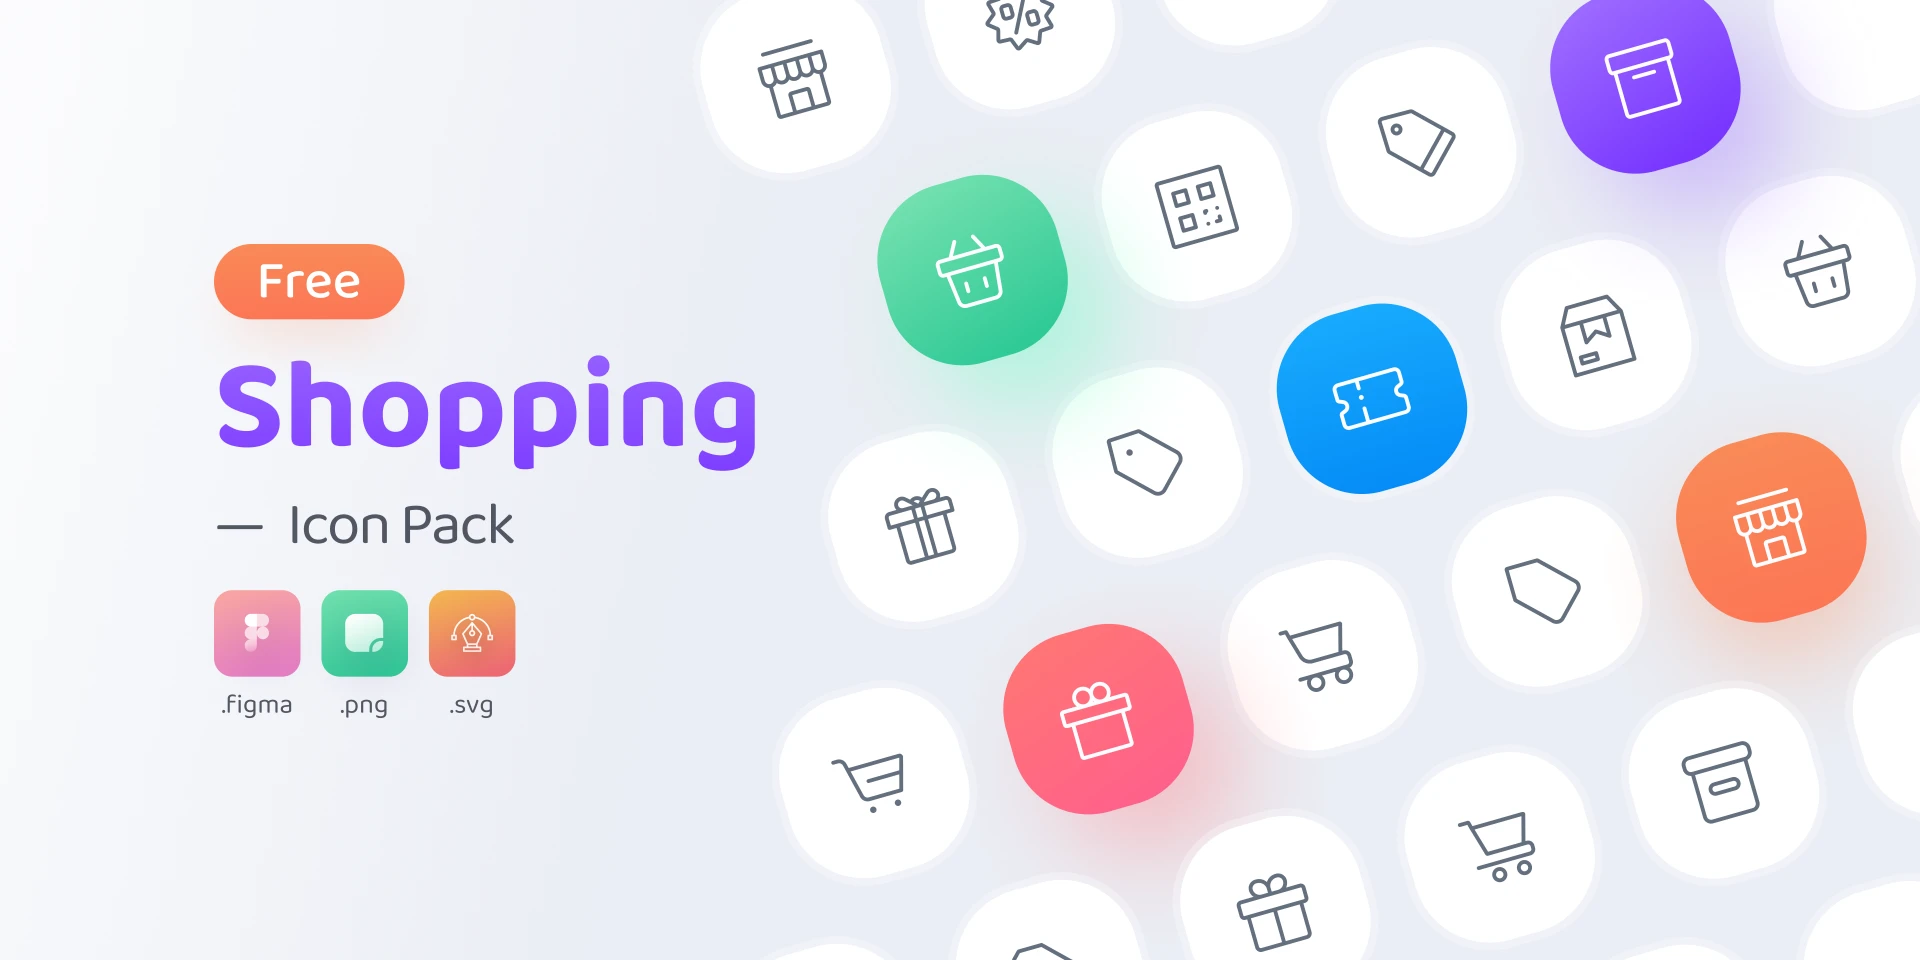 Free Shopping Icon Pack for Figma and Adobe XD